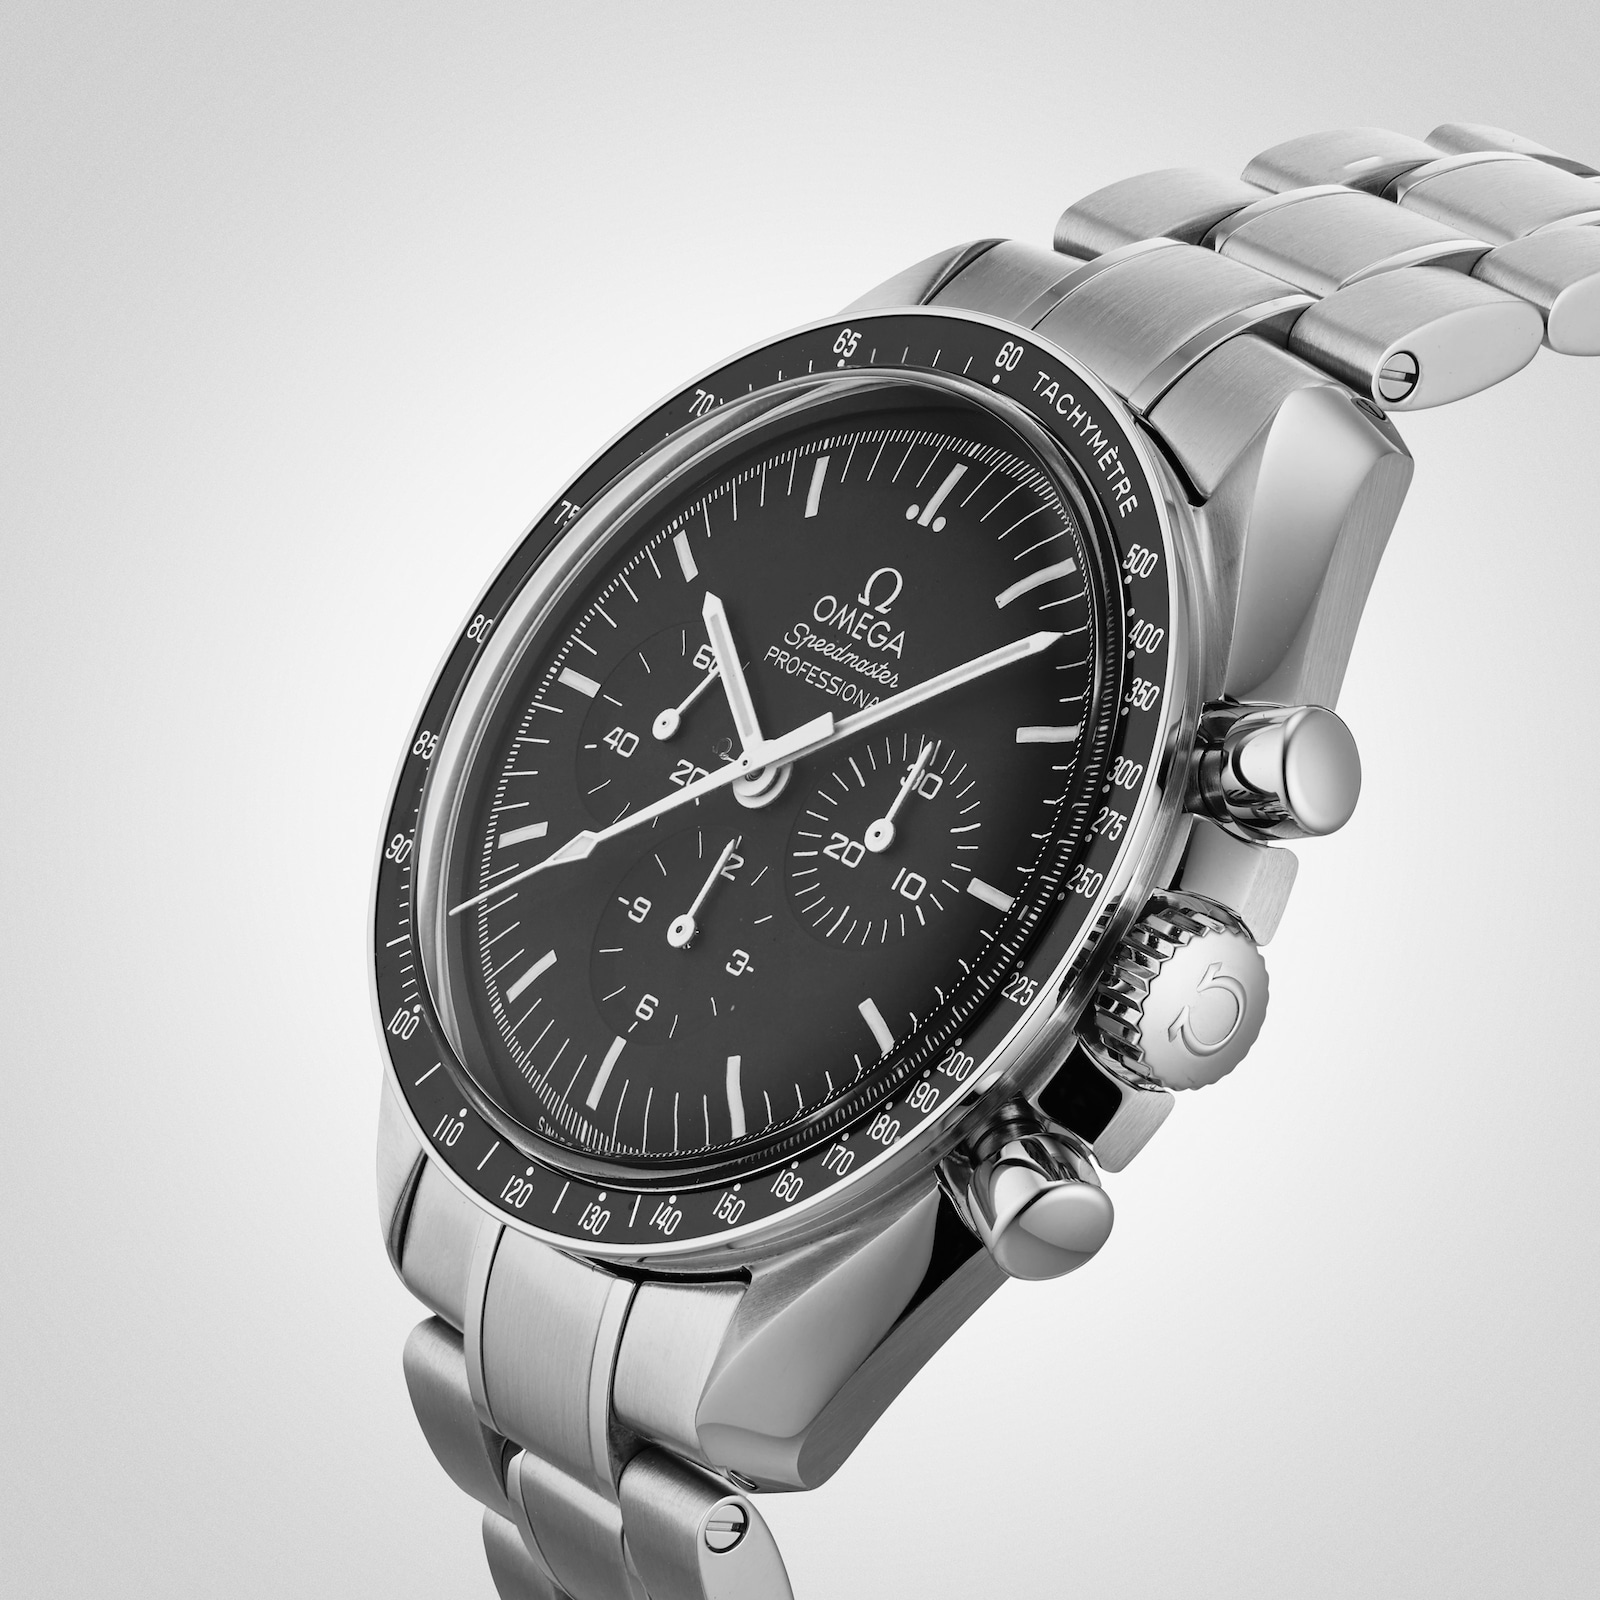 Omega Speedmaster Professional Moonwatch First Watch On The Moon